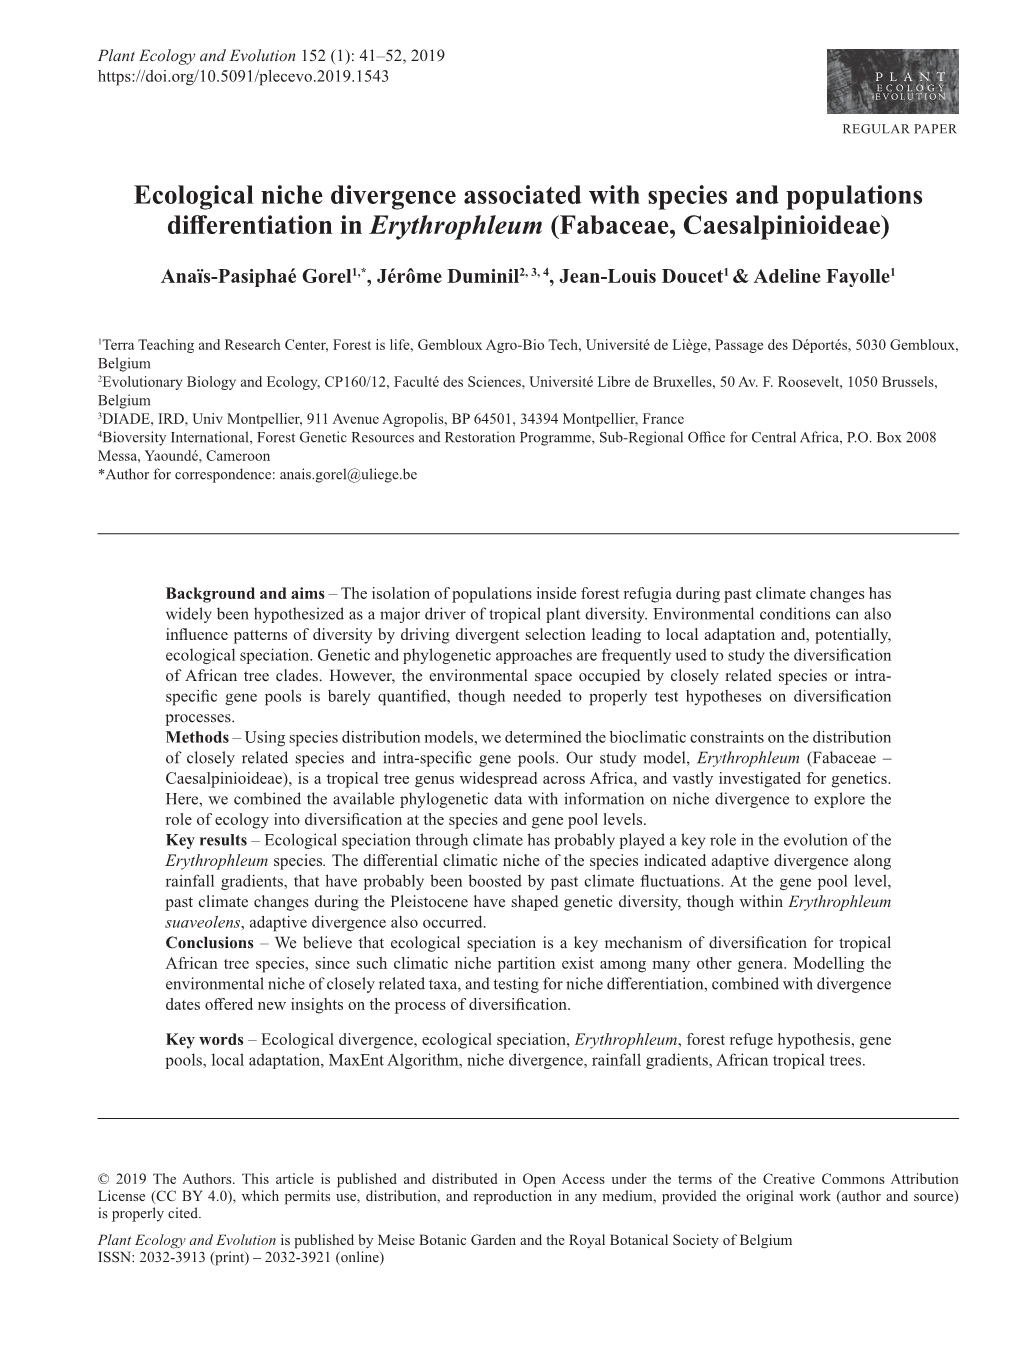 Ecological Niche Divergence Associated with Species and Populations Differentiation in Erythrophleum (Fabaceae, Caesalpinioideae)